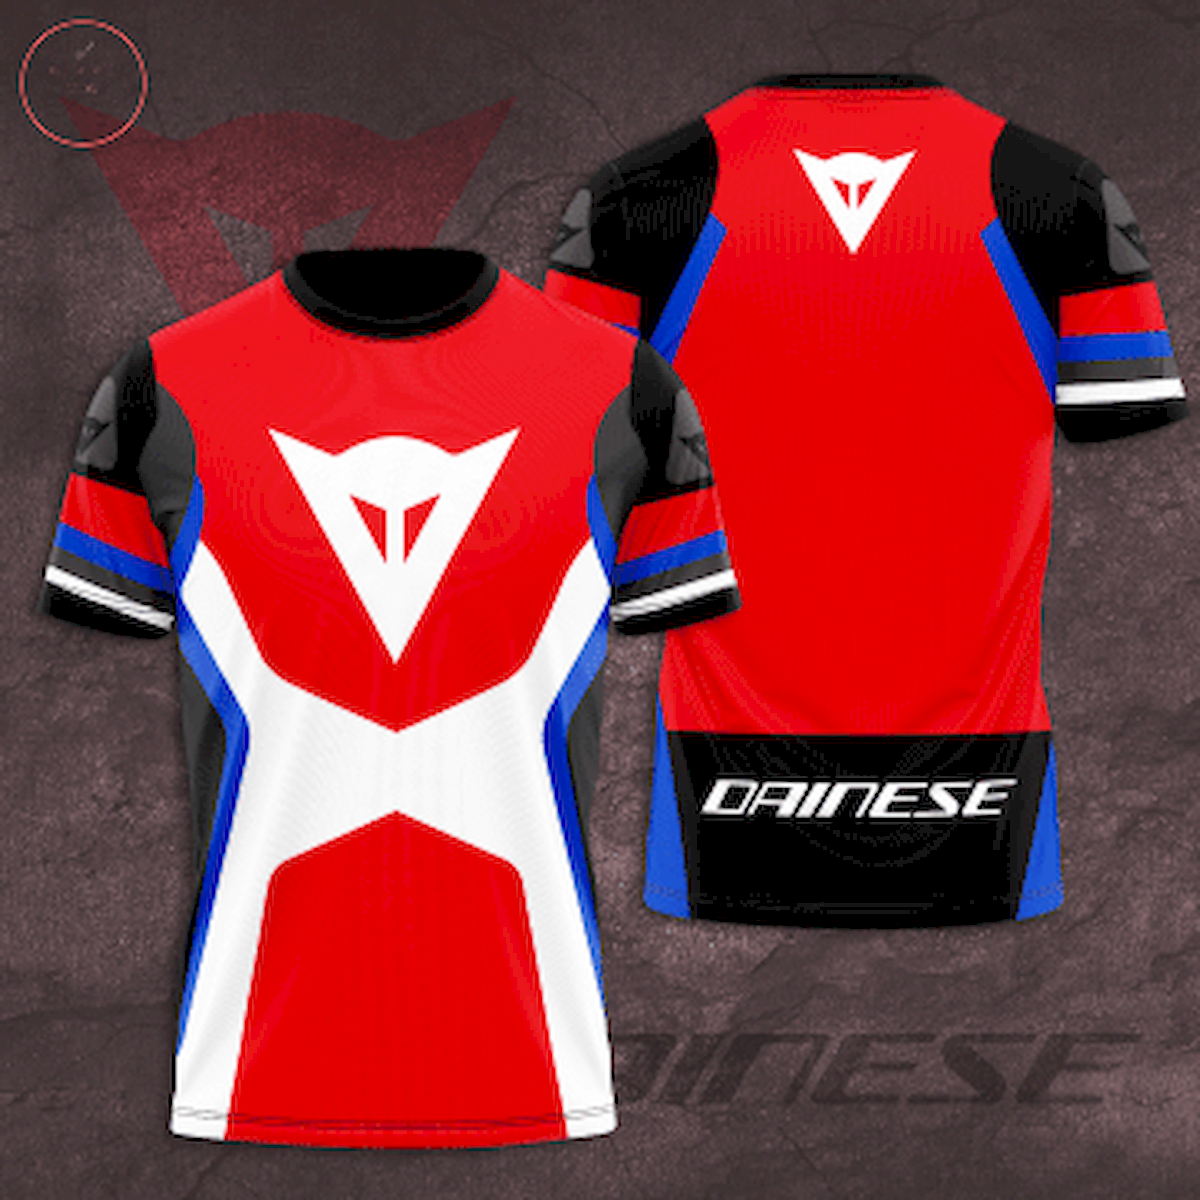 Dainese MotorGP Racing Team All Over Printed Shirts